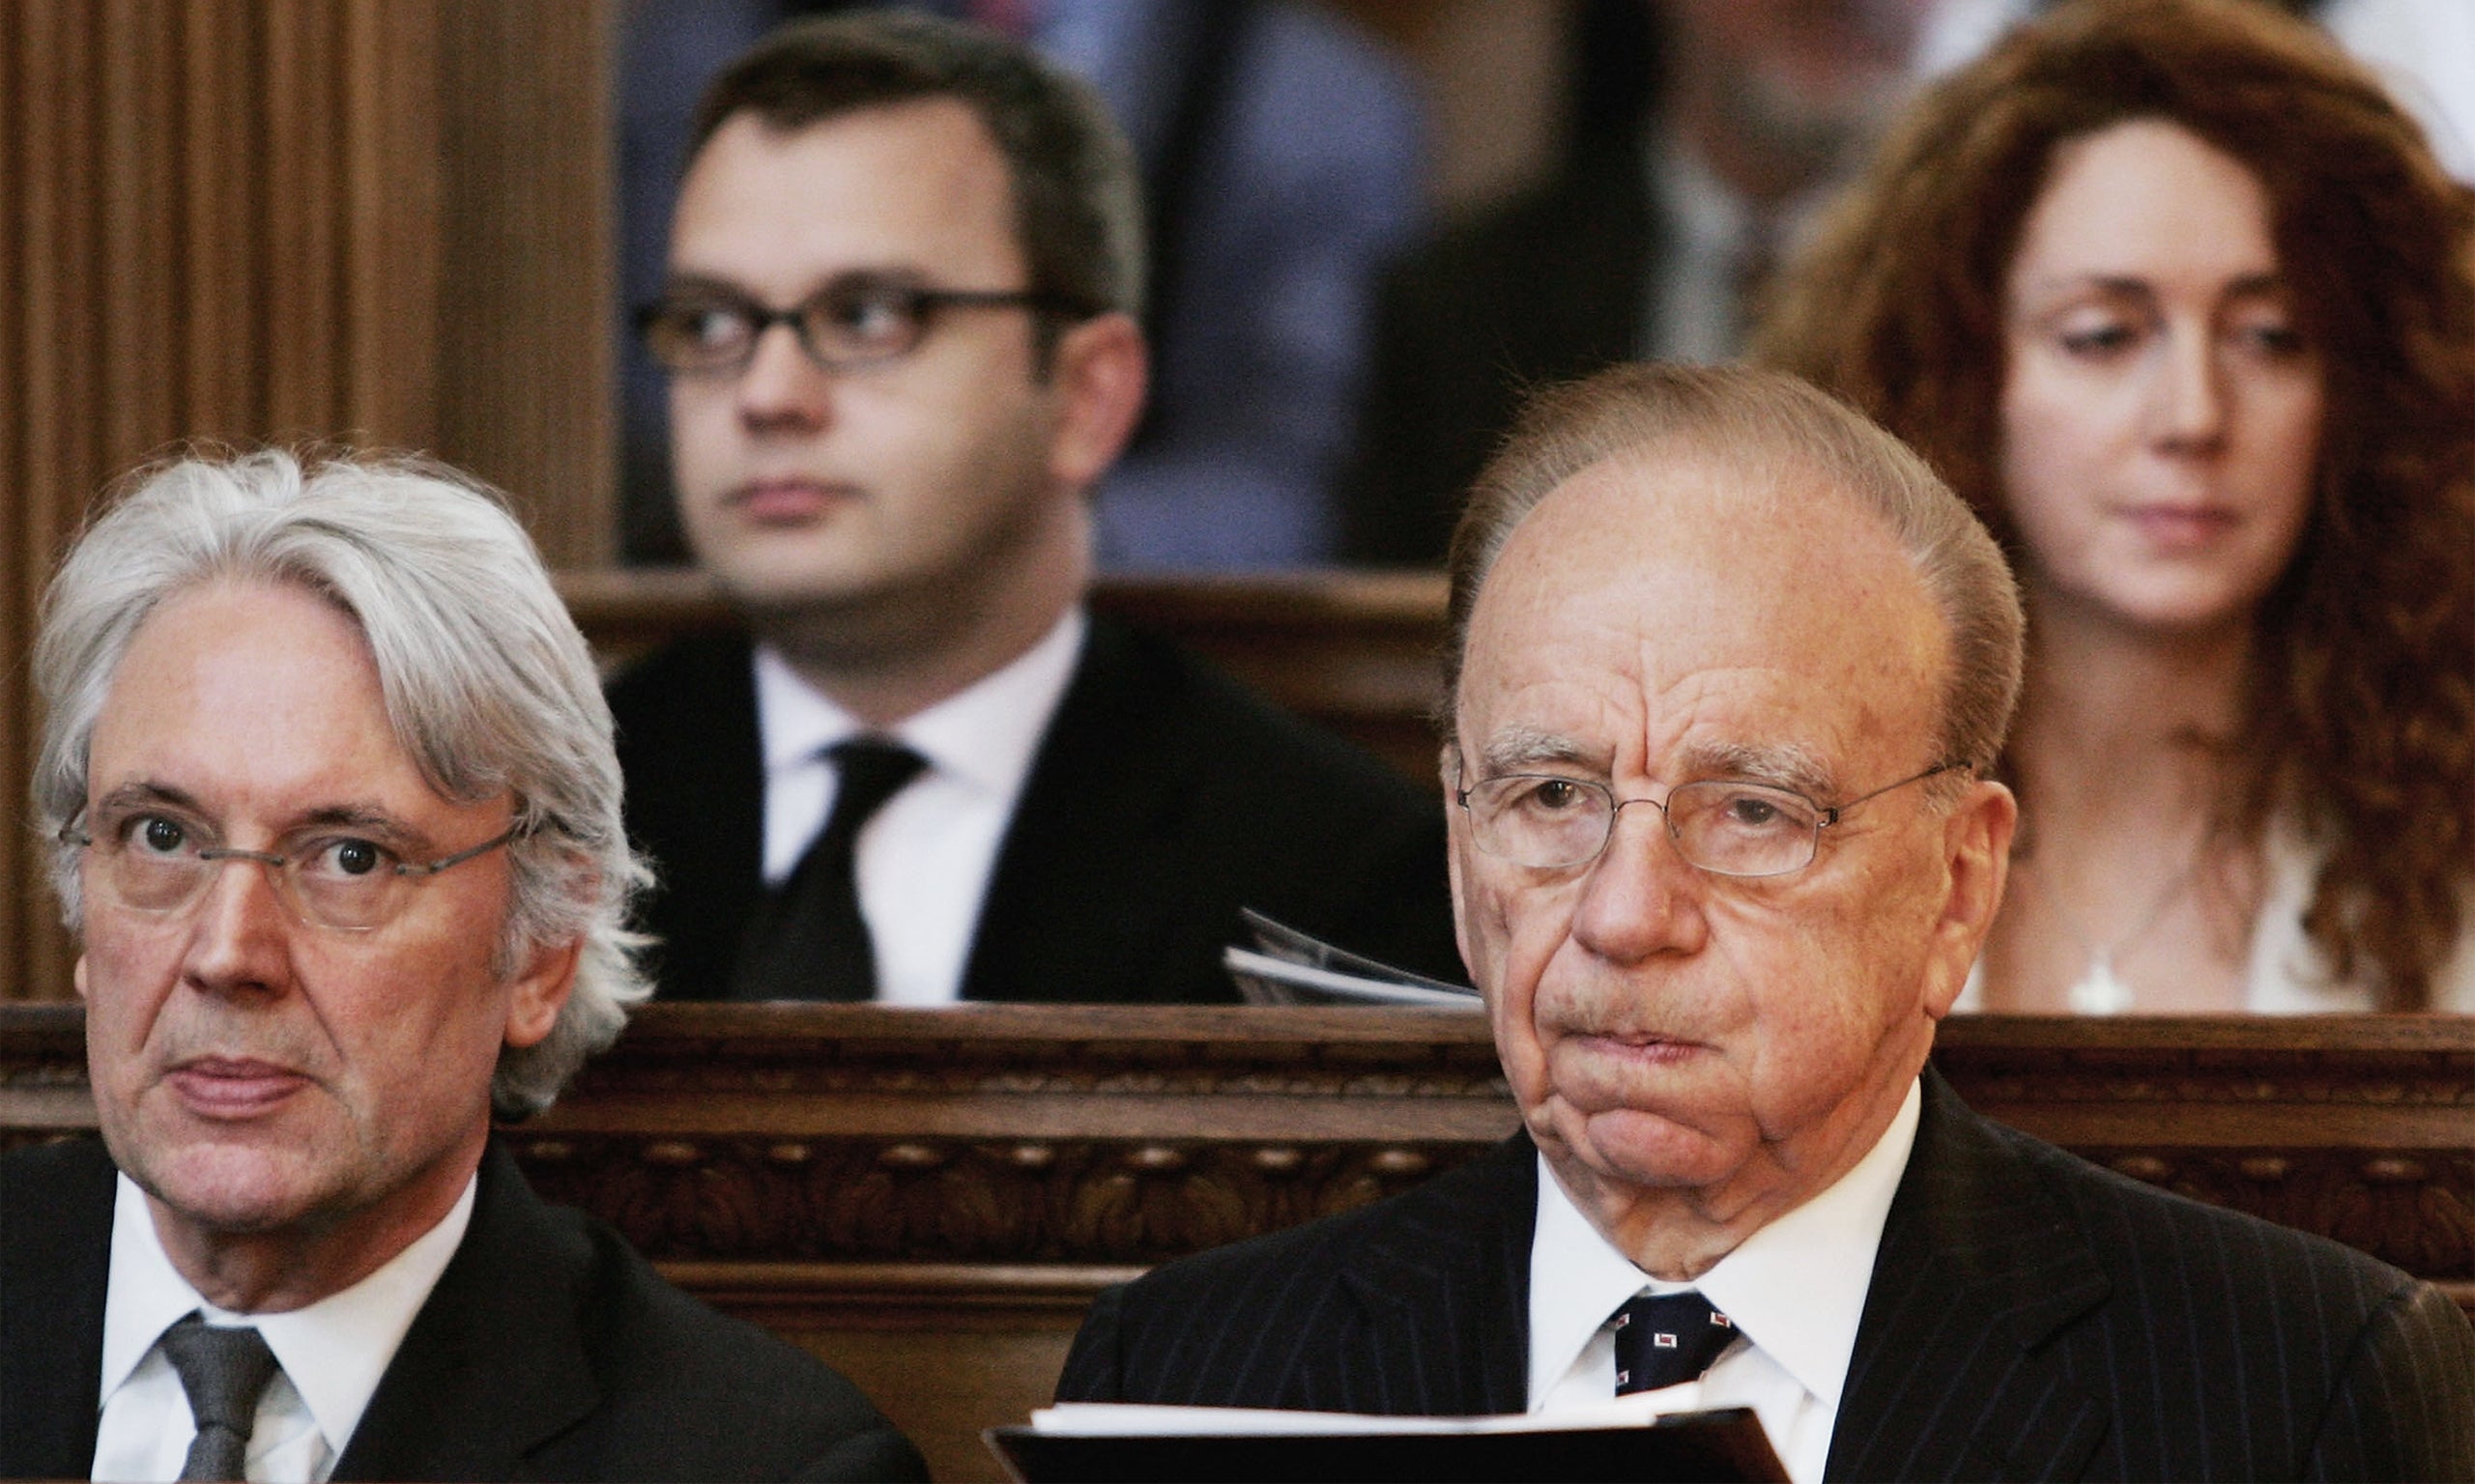 Rupert Murdoch with Andy Coulson and Rebekah Brooks behind him in 2005. Next to Murdoch is Les Hinton, then NI chairman